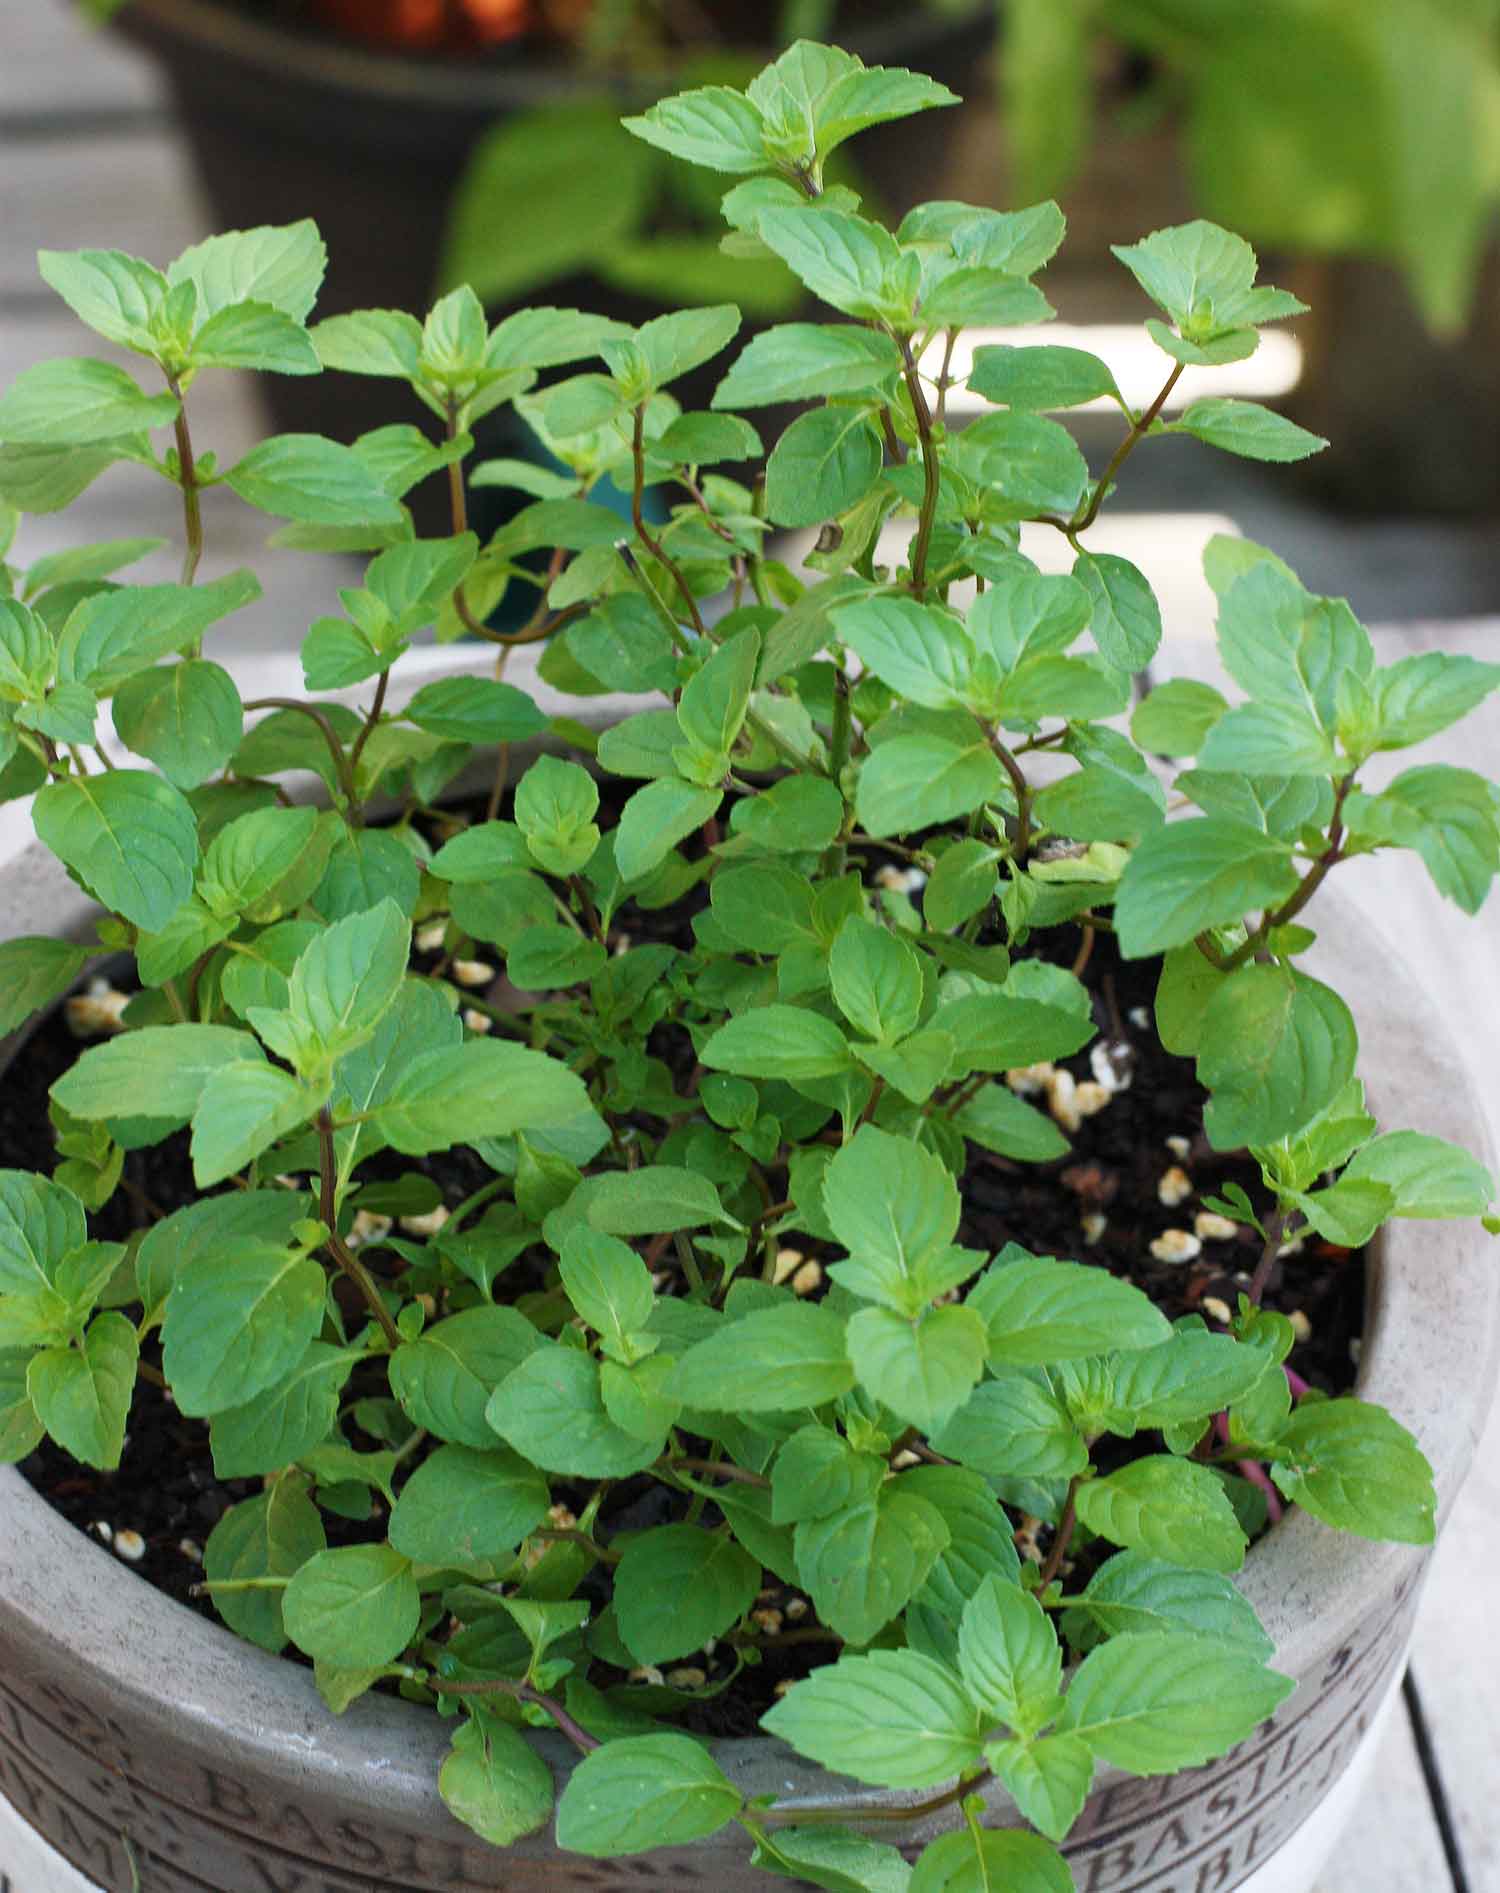 Ginger mint in a pot.